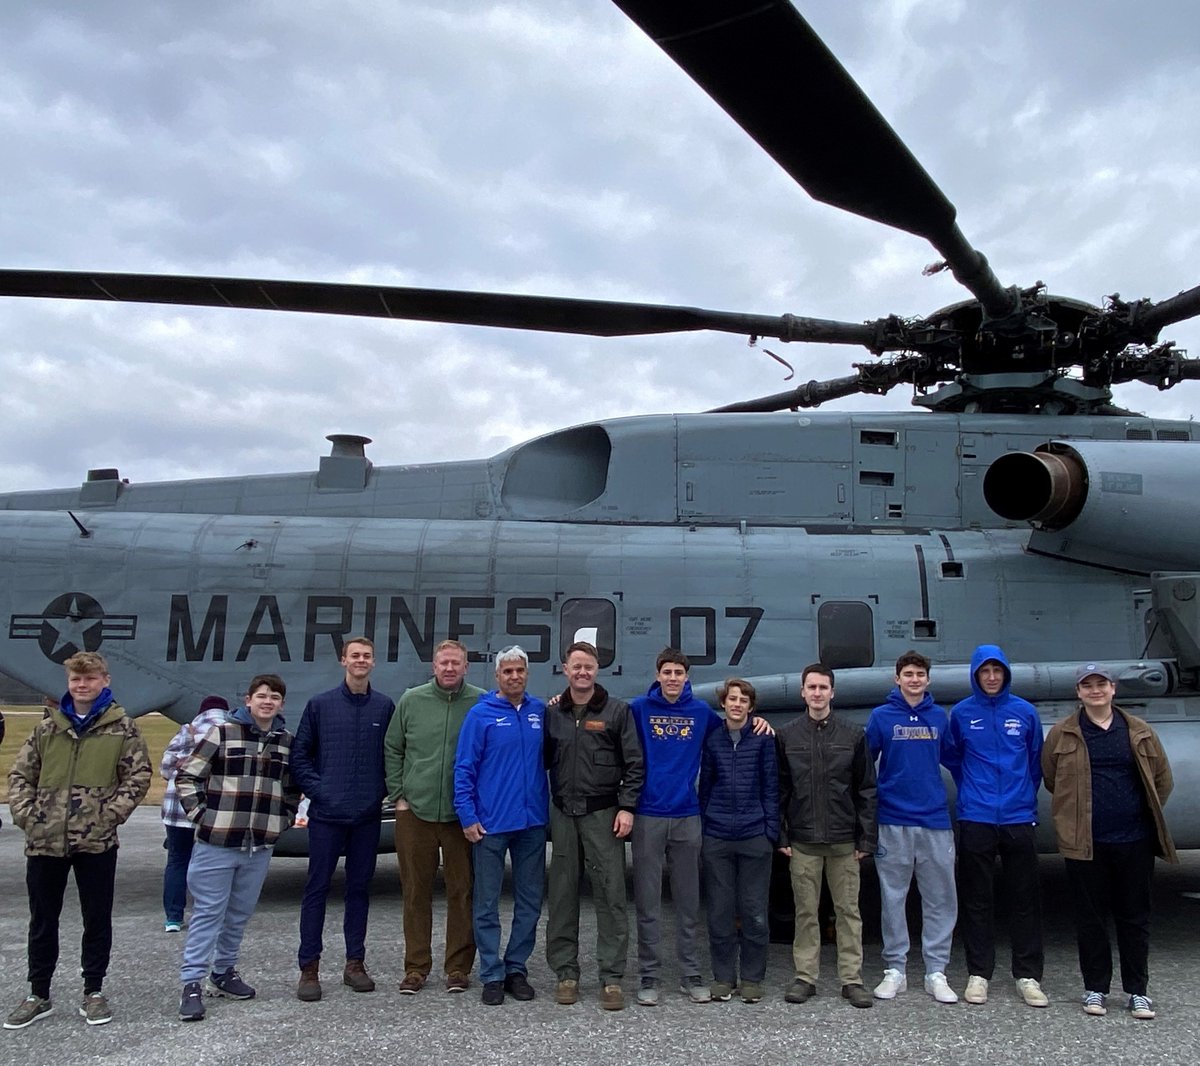 Captain Patrick Finley ‘11 (USNA ’15) hosted Fr. Baker, Mr. Albornoz and several of our Dons today at Martin State Airport today. Capt. Finley will be taking part in a flyover tomorrow in advance of the Ravens vs. Dolphins game. Thank you for your service, Patrick!